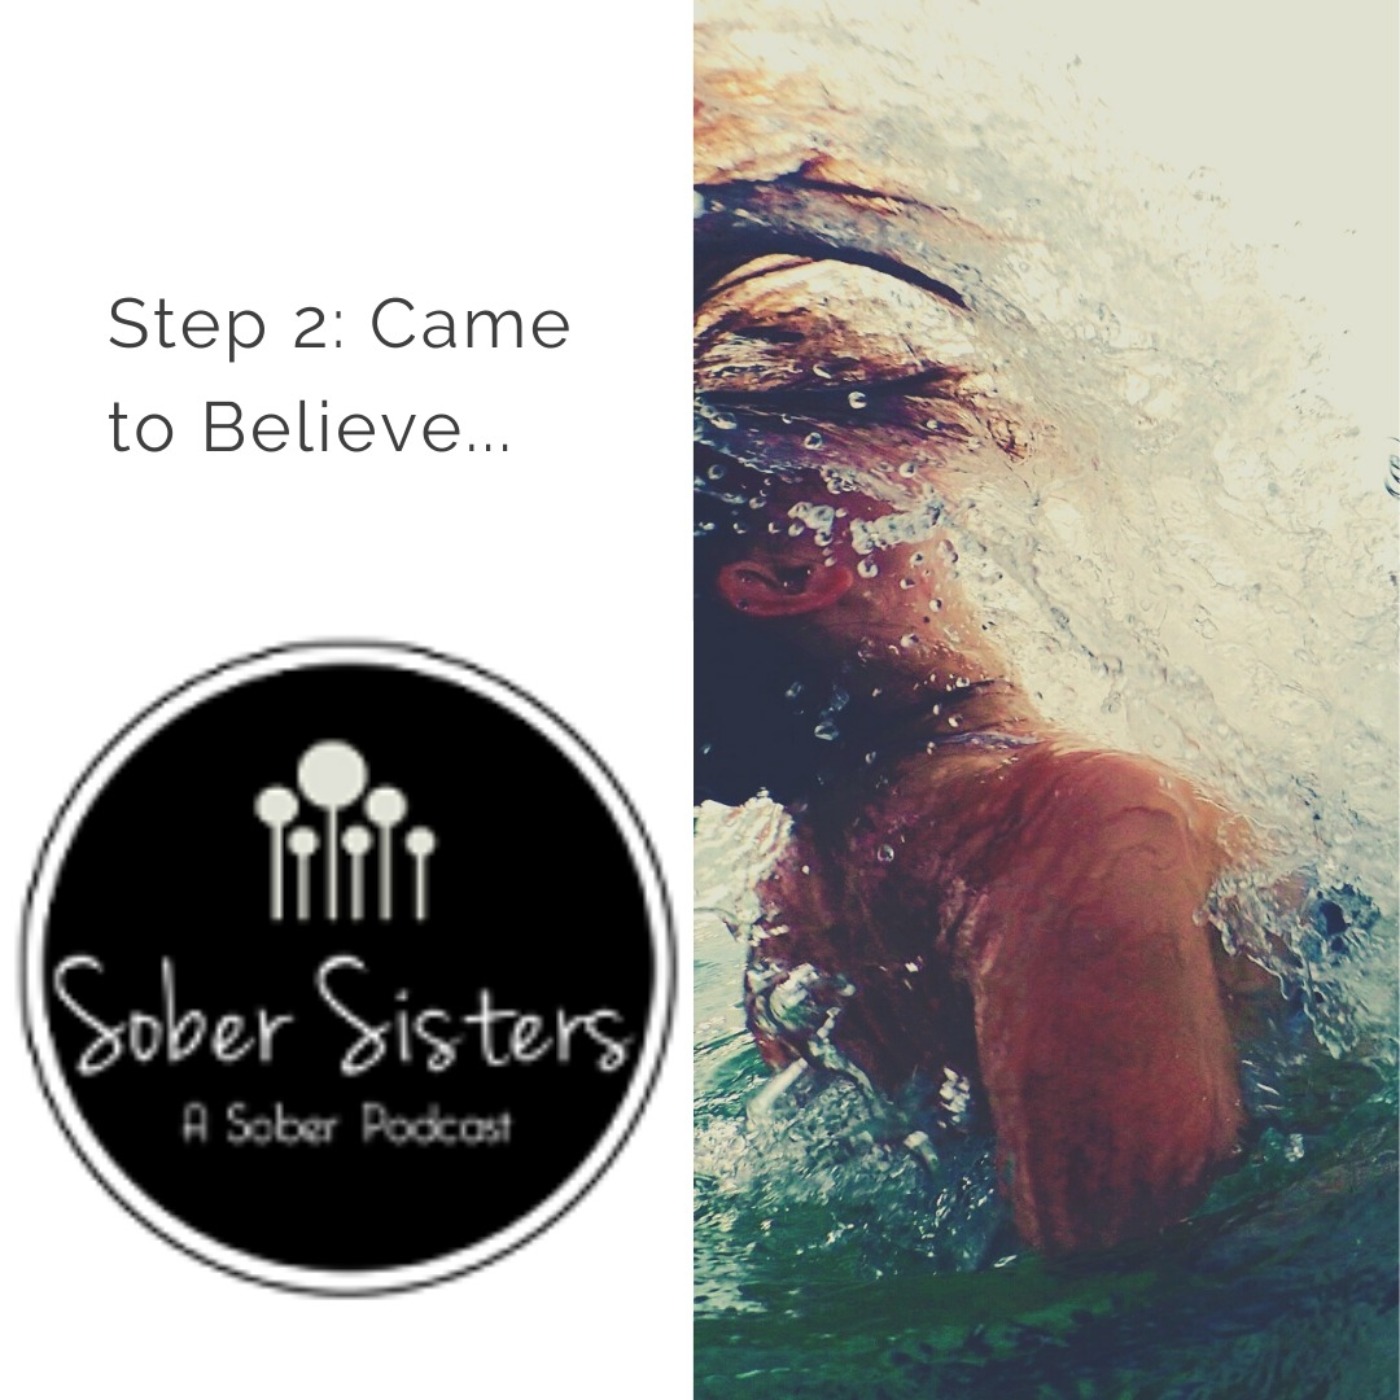 Step 2: Came to Believe...